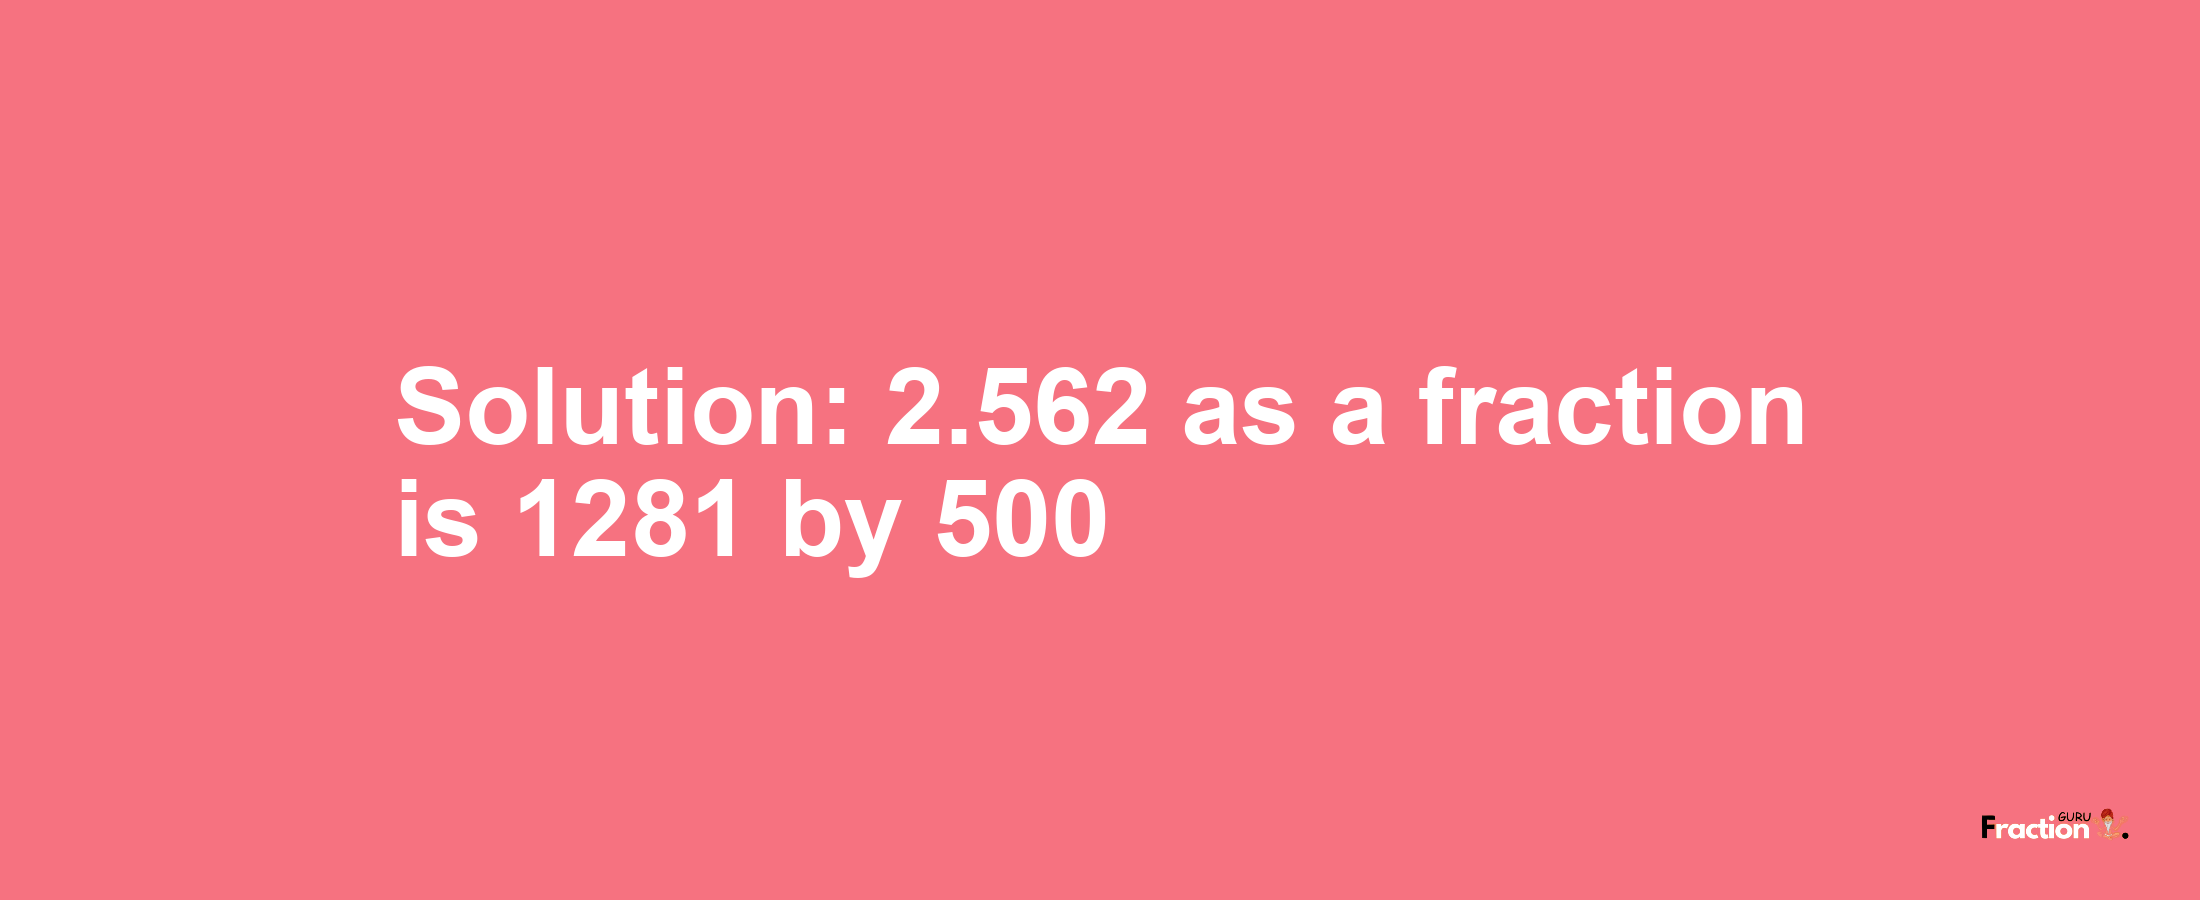 Solution:2.562 as a fraction is 1281/500